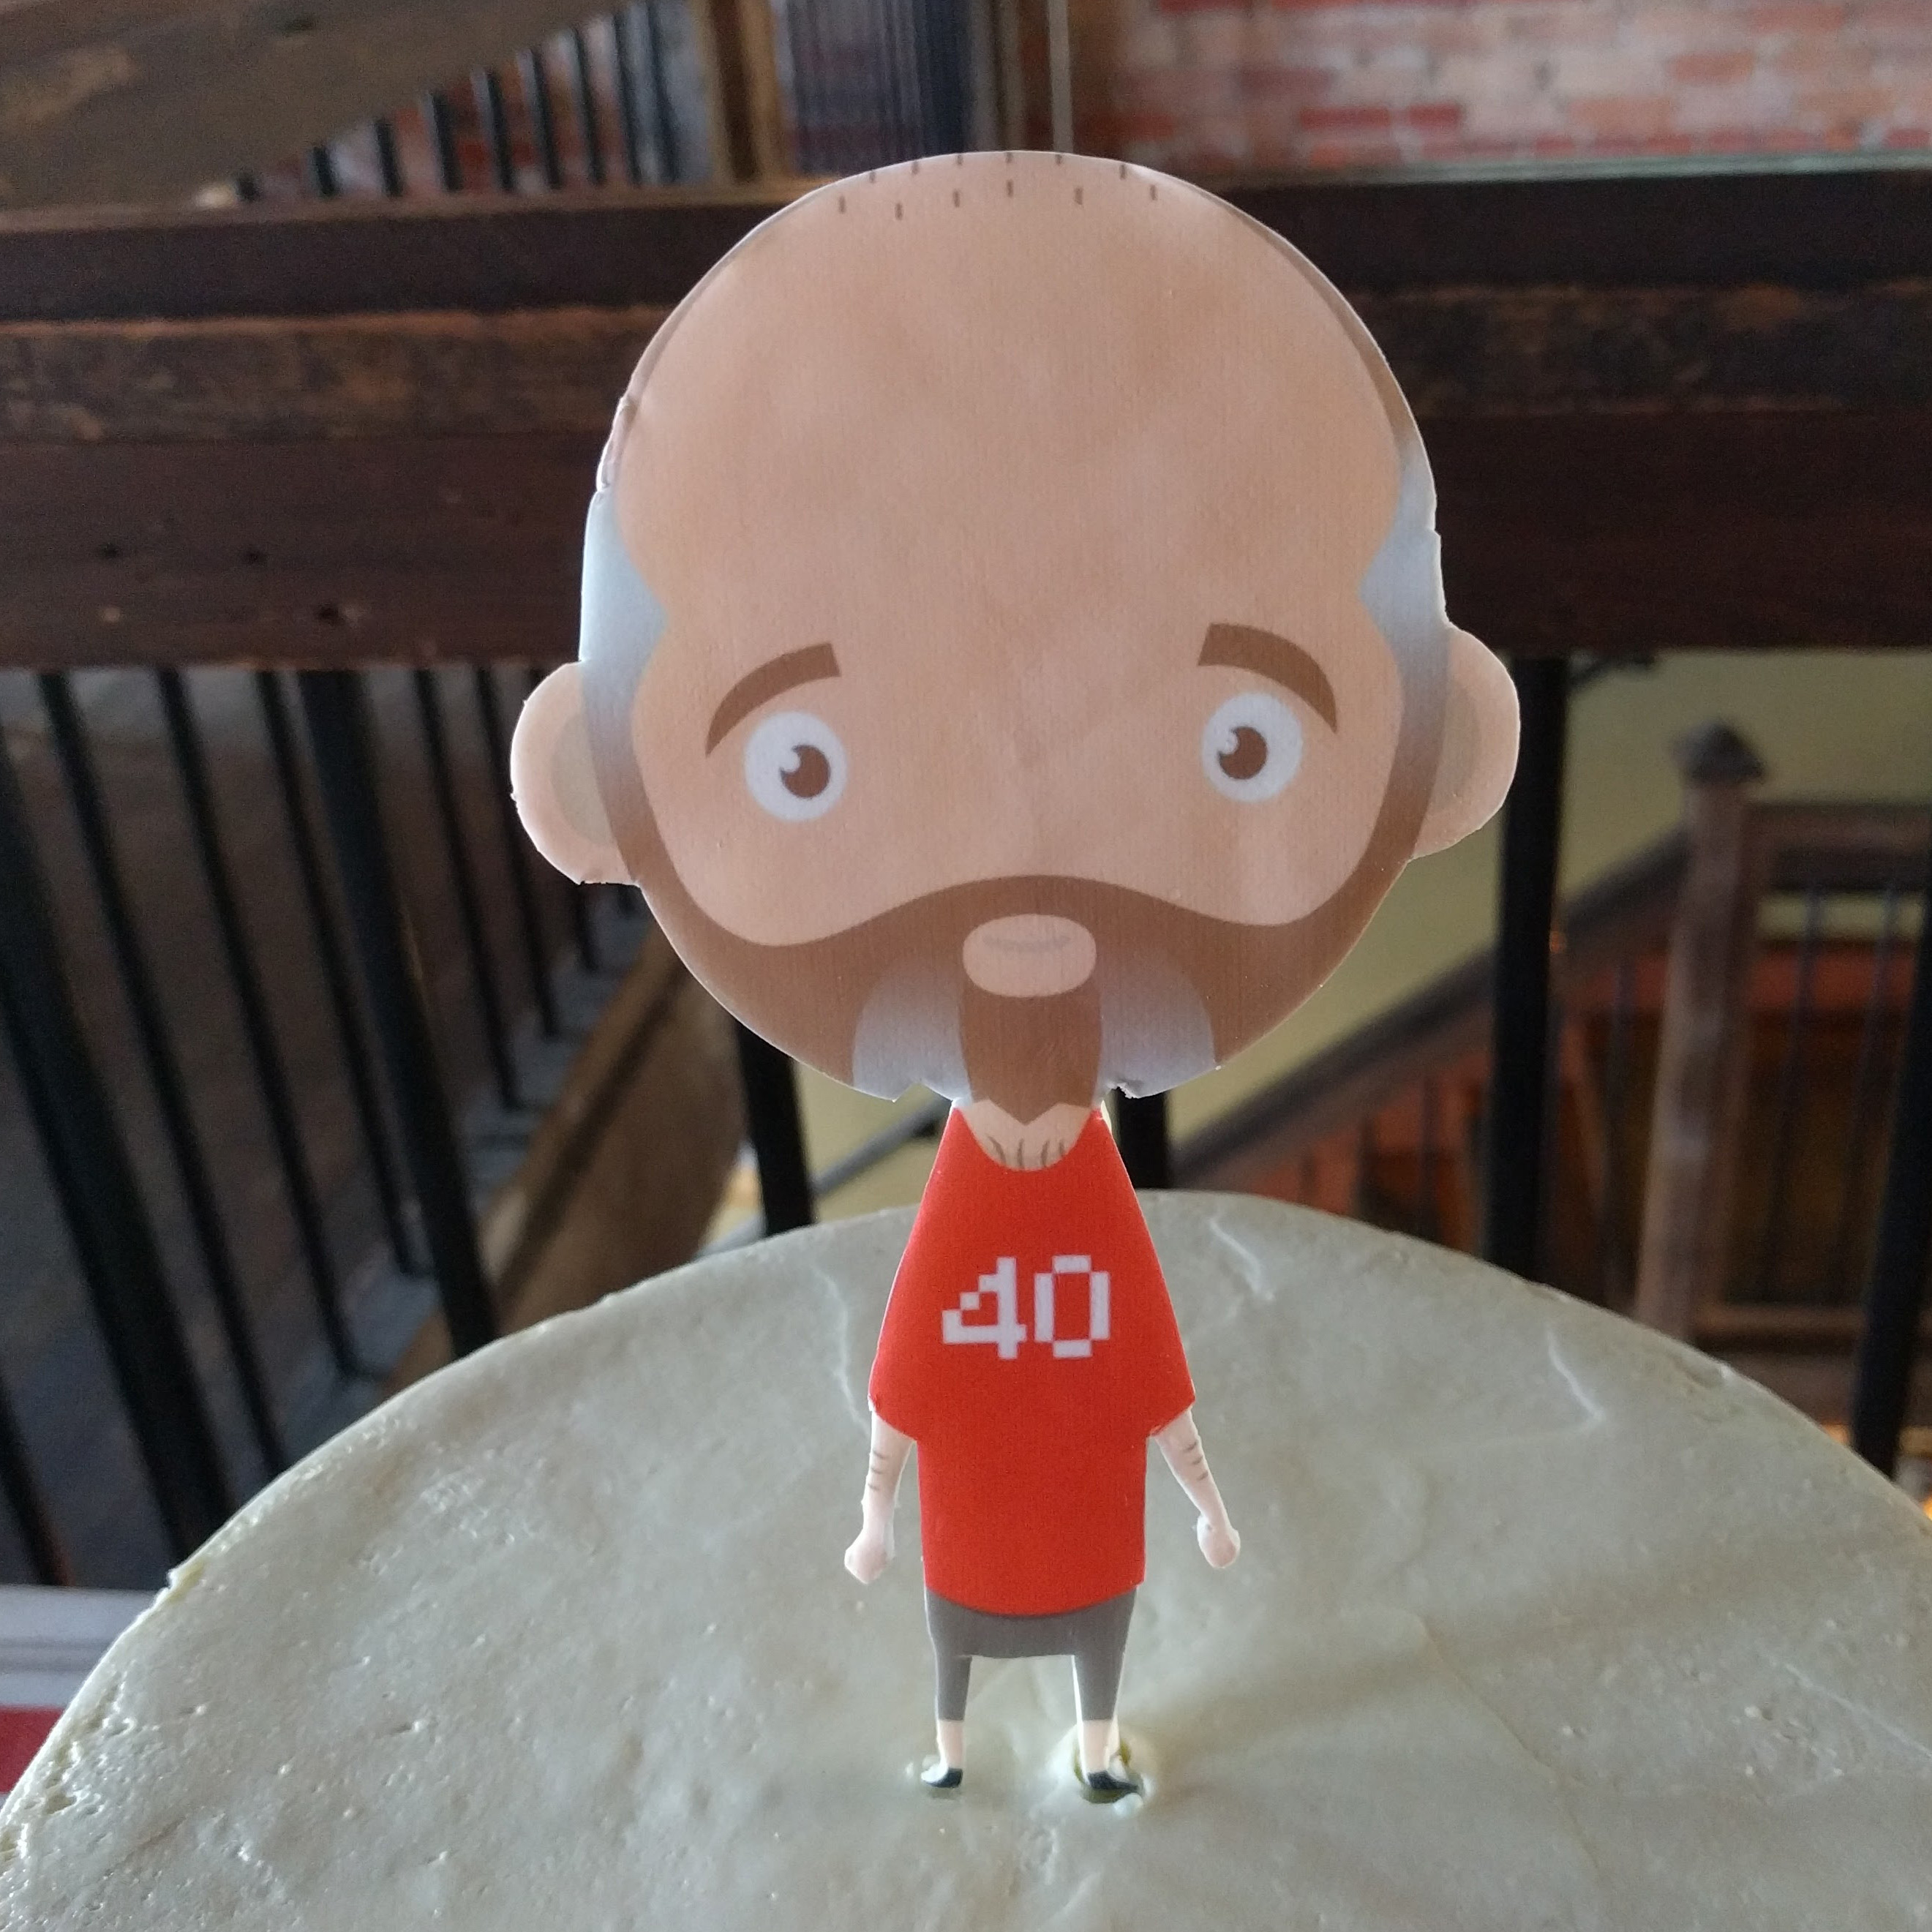 It's me! On a Cake.